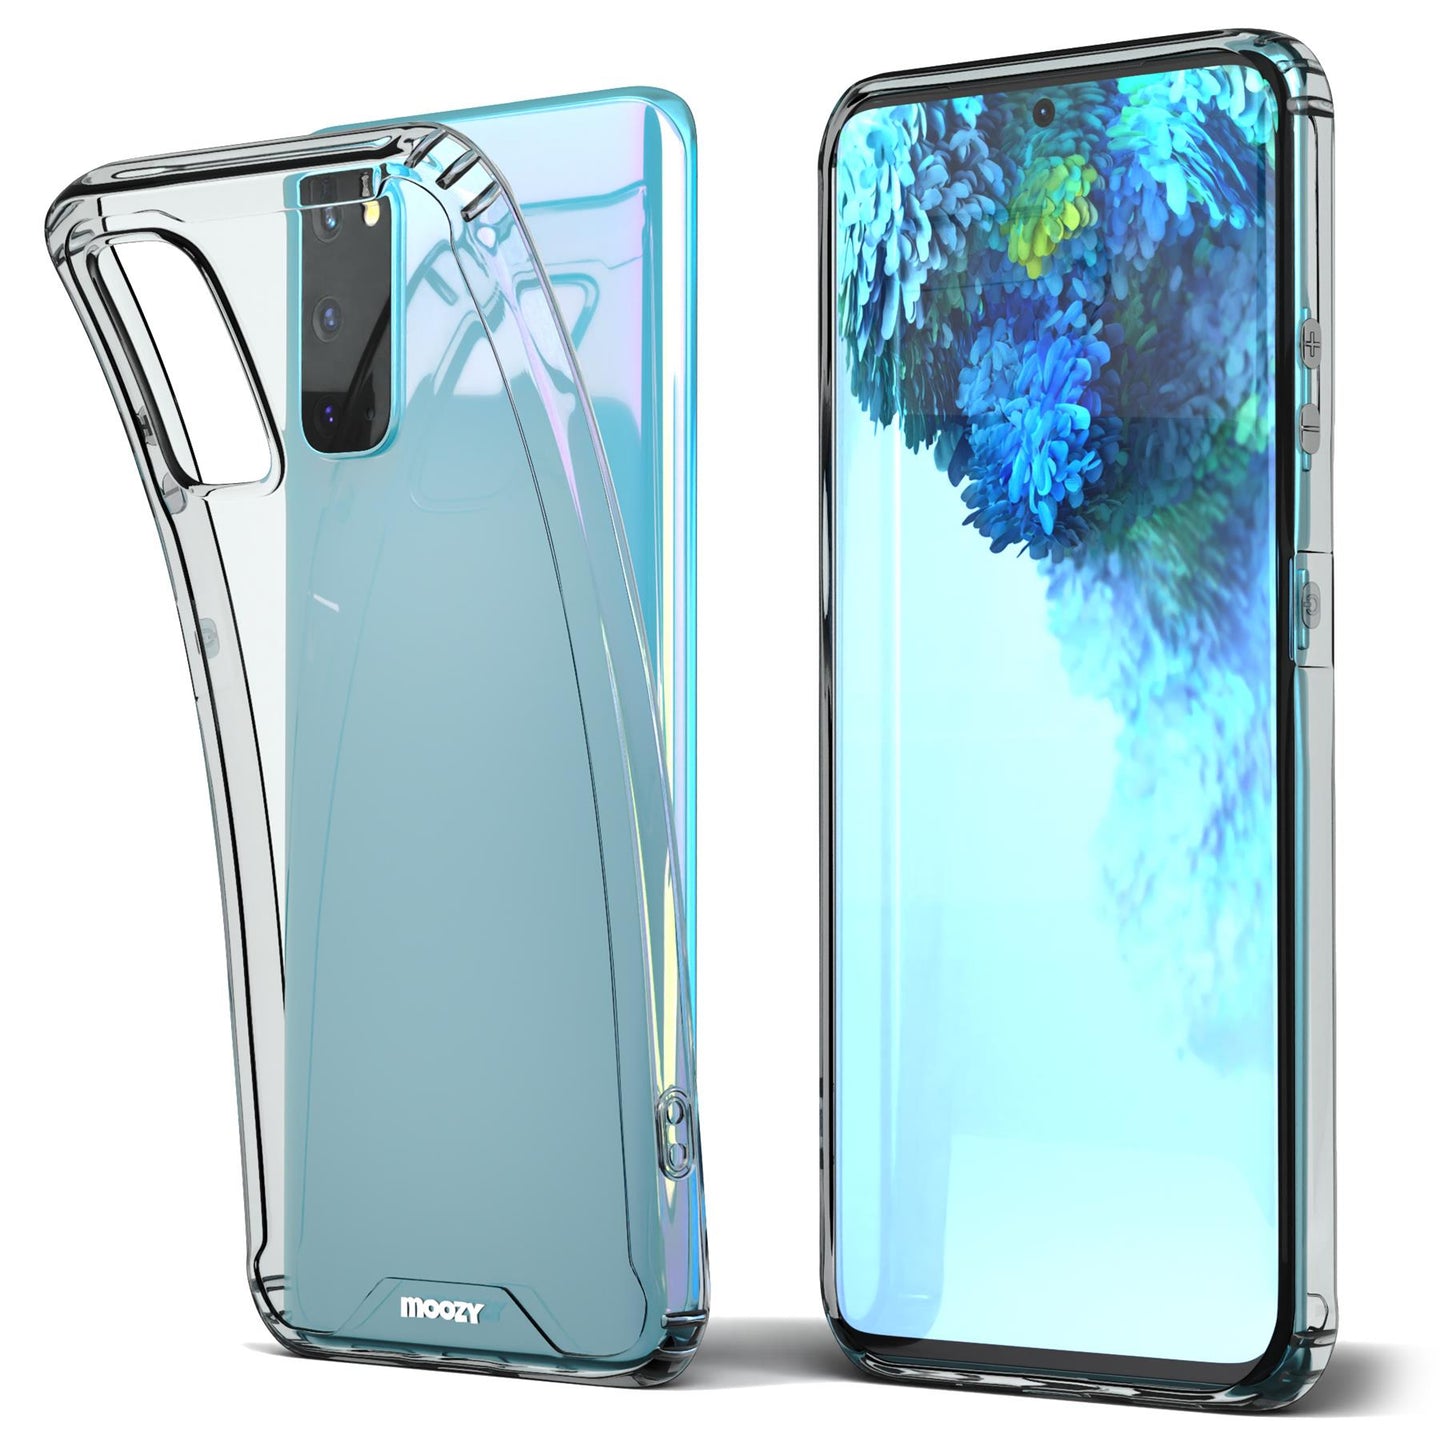 Moozy Xframe Shockproof Case for Samsung S20 - Transparent Rim Case, Double Colour Clear Hybrid Cover with Shock Absorbing TPU Rim